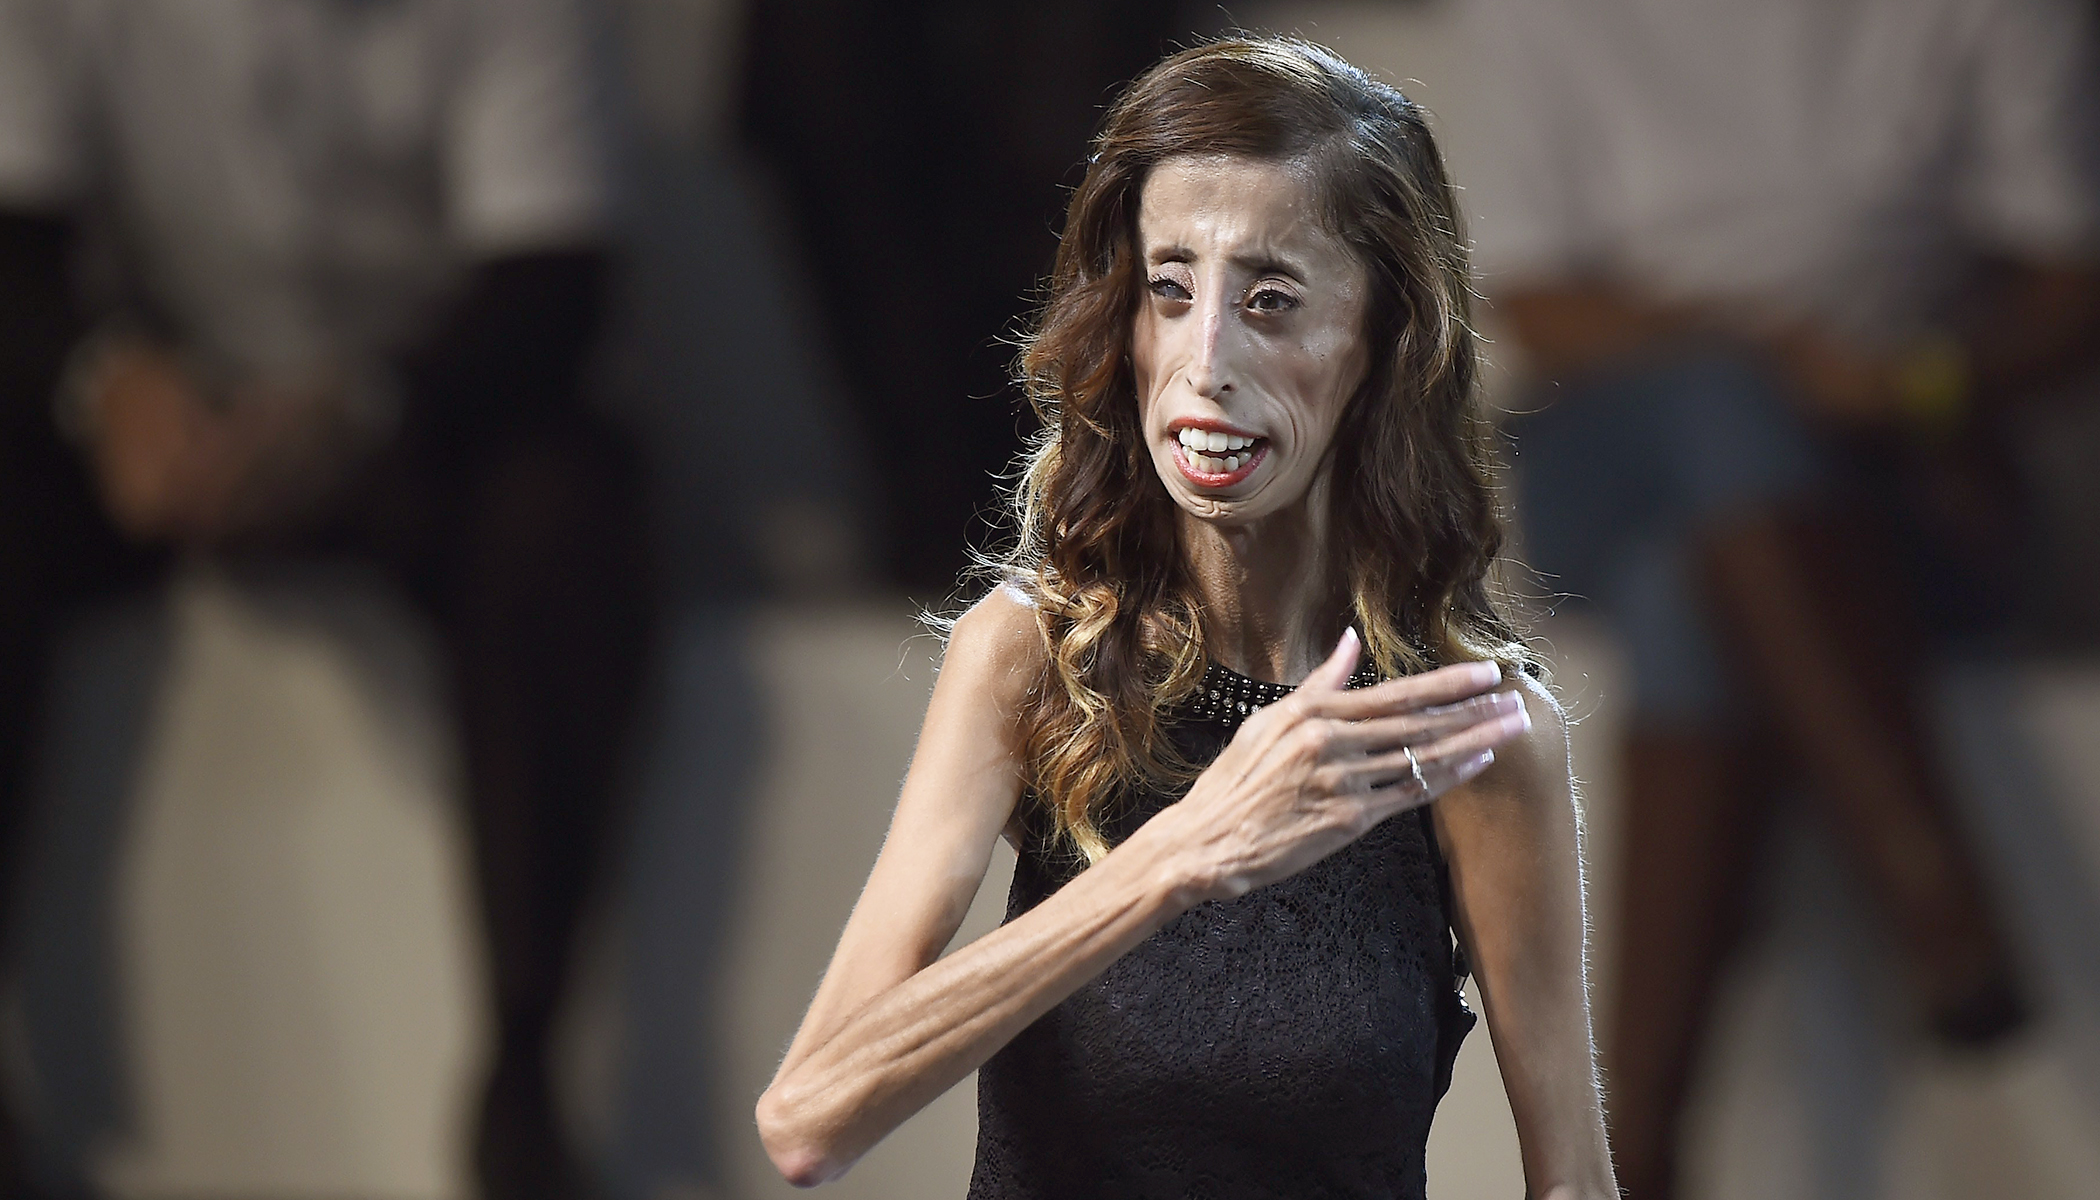 Lizzie Velásquez,ugly looks,World's Ugliest Woman,THE EPOCH TIMES.